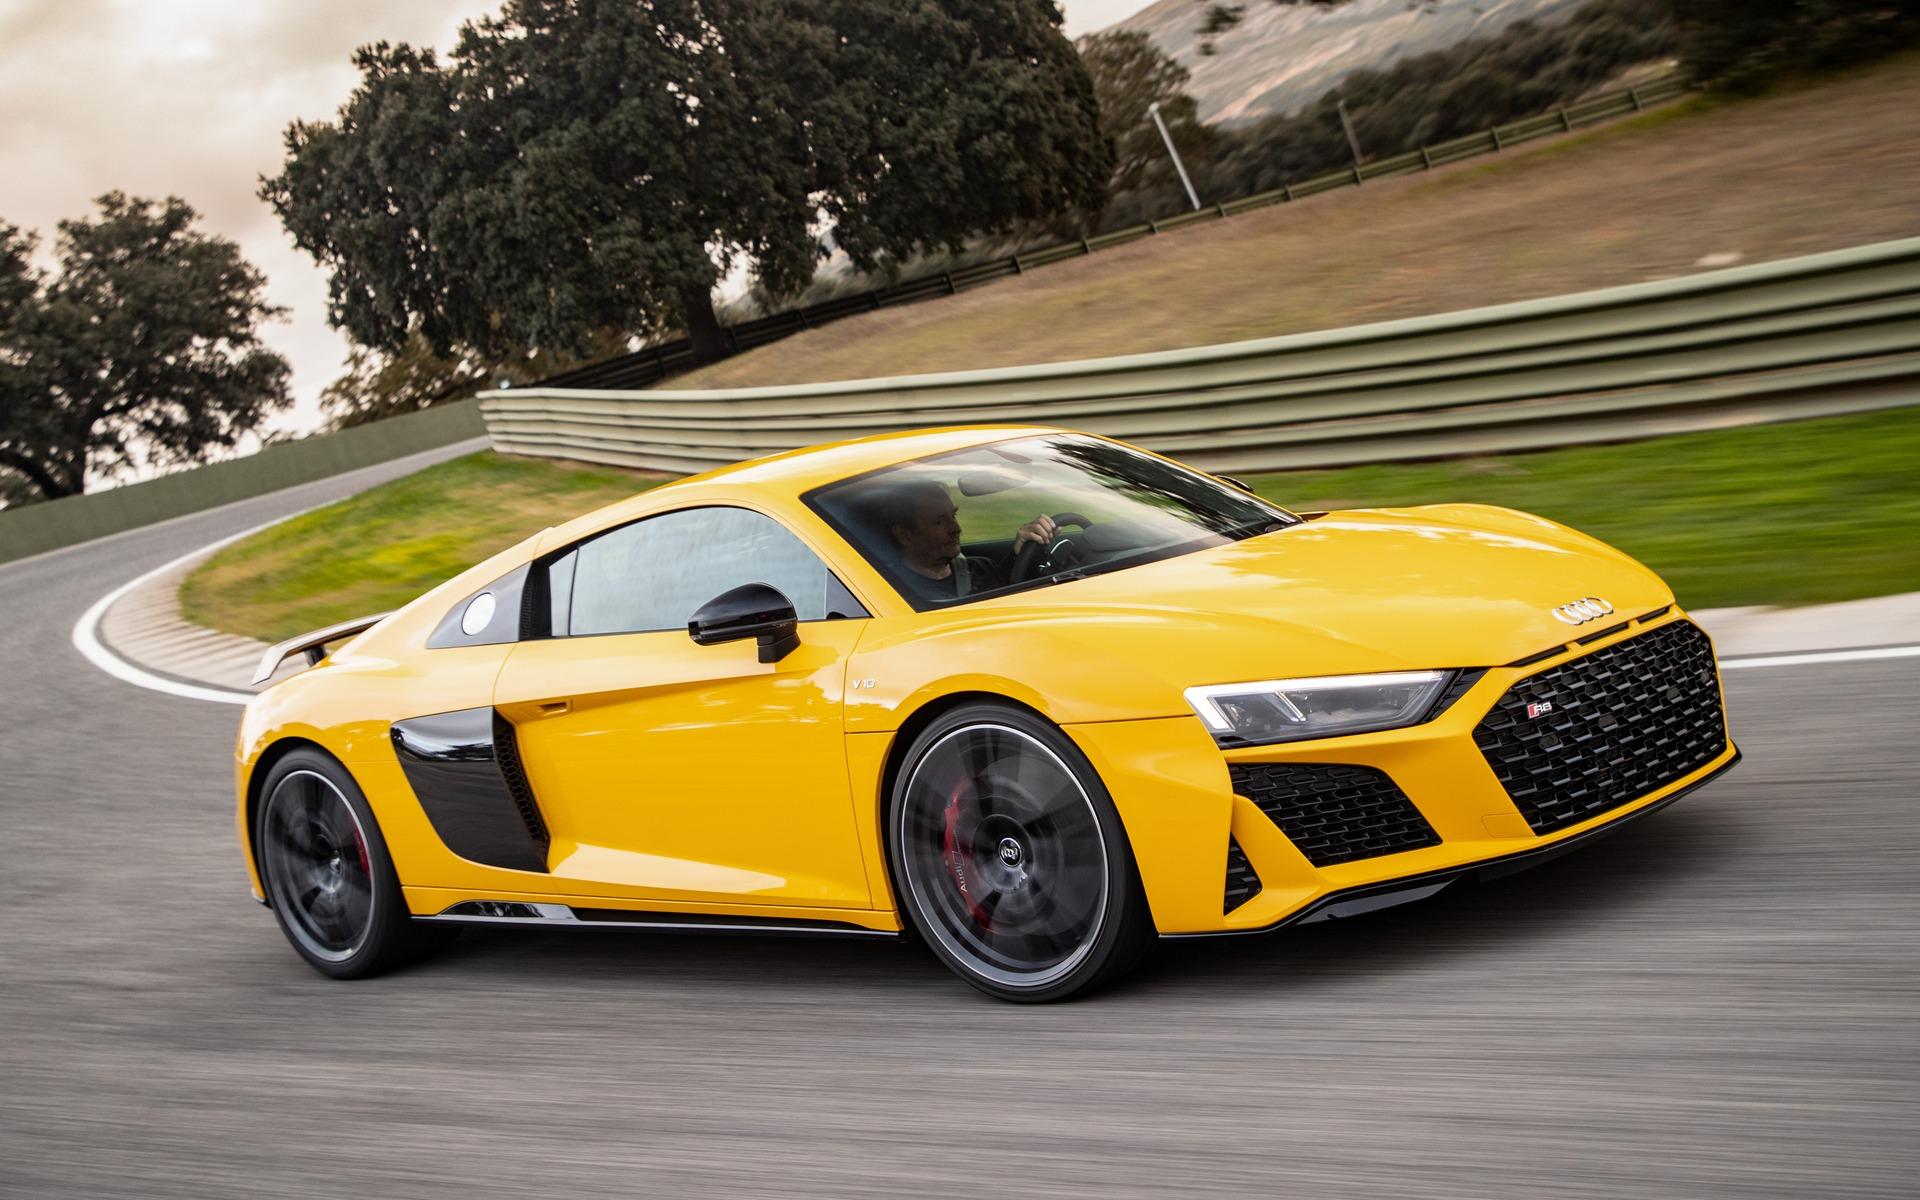 Audi R8 V10 performance quattro: Racing is in its Blood